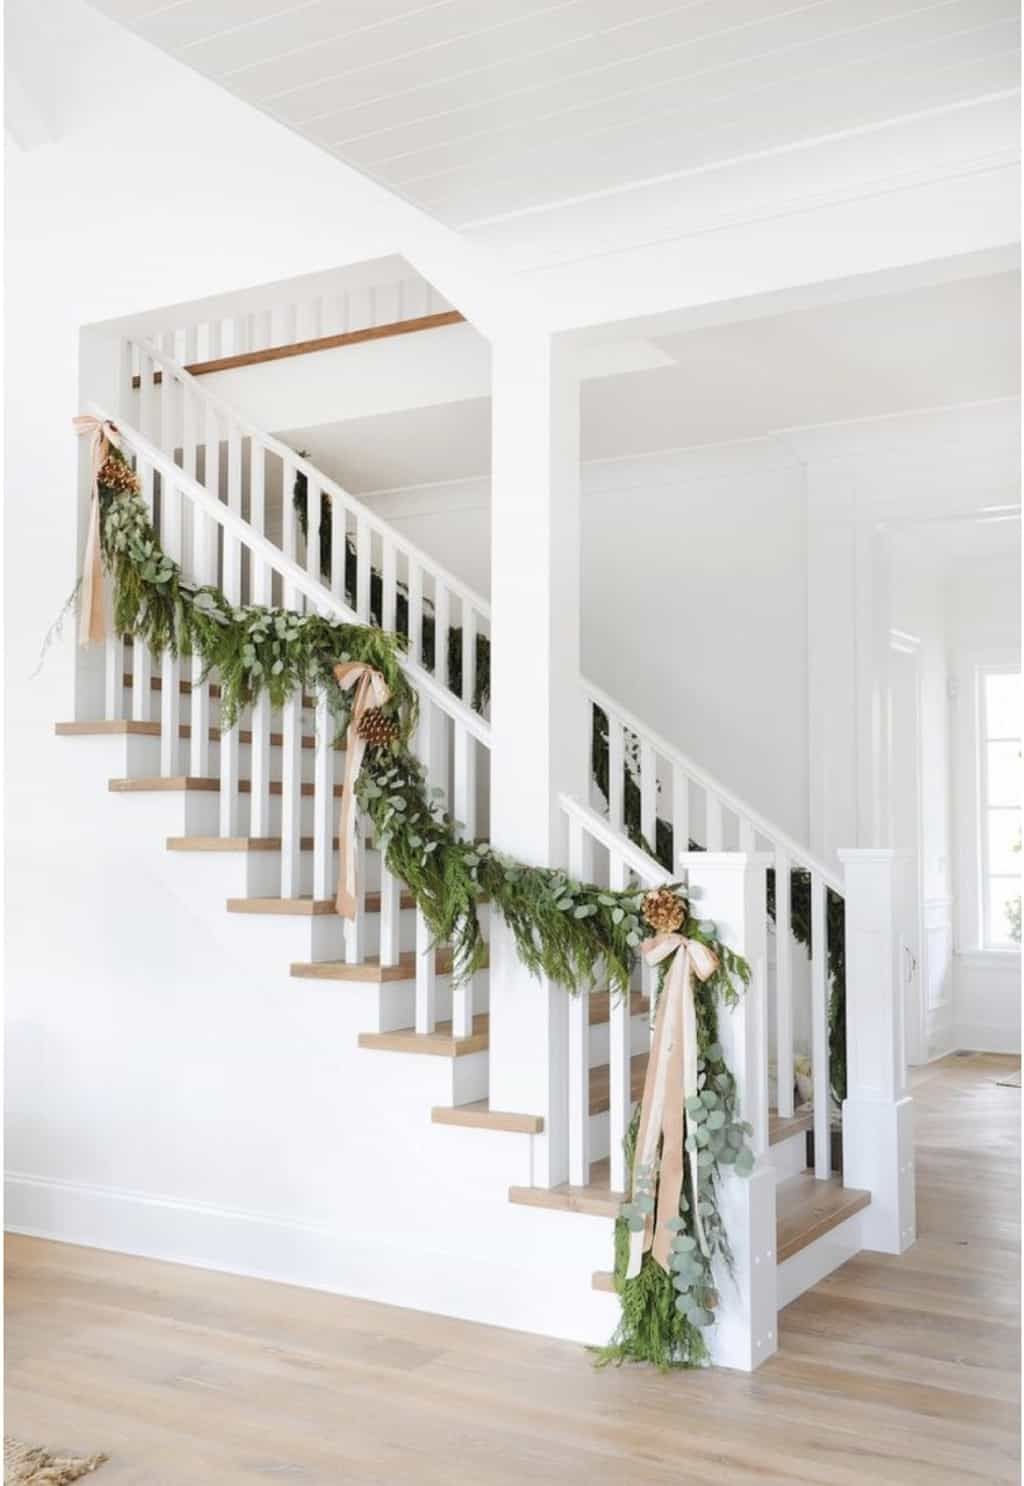 Christmas Decor We Are Drooling Over in 2020 - Christmas Decor We Are Drooling Over in 2020 -   christmas decorations living room farmhouse